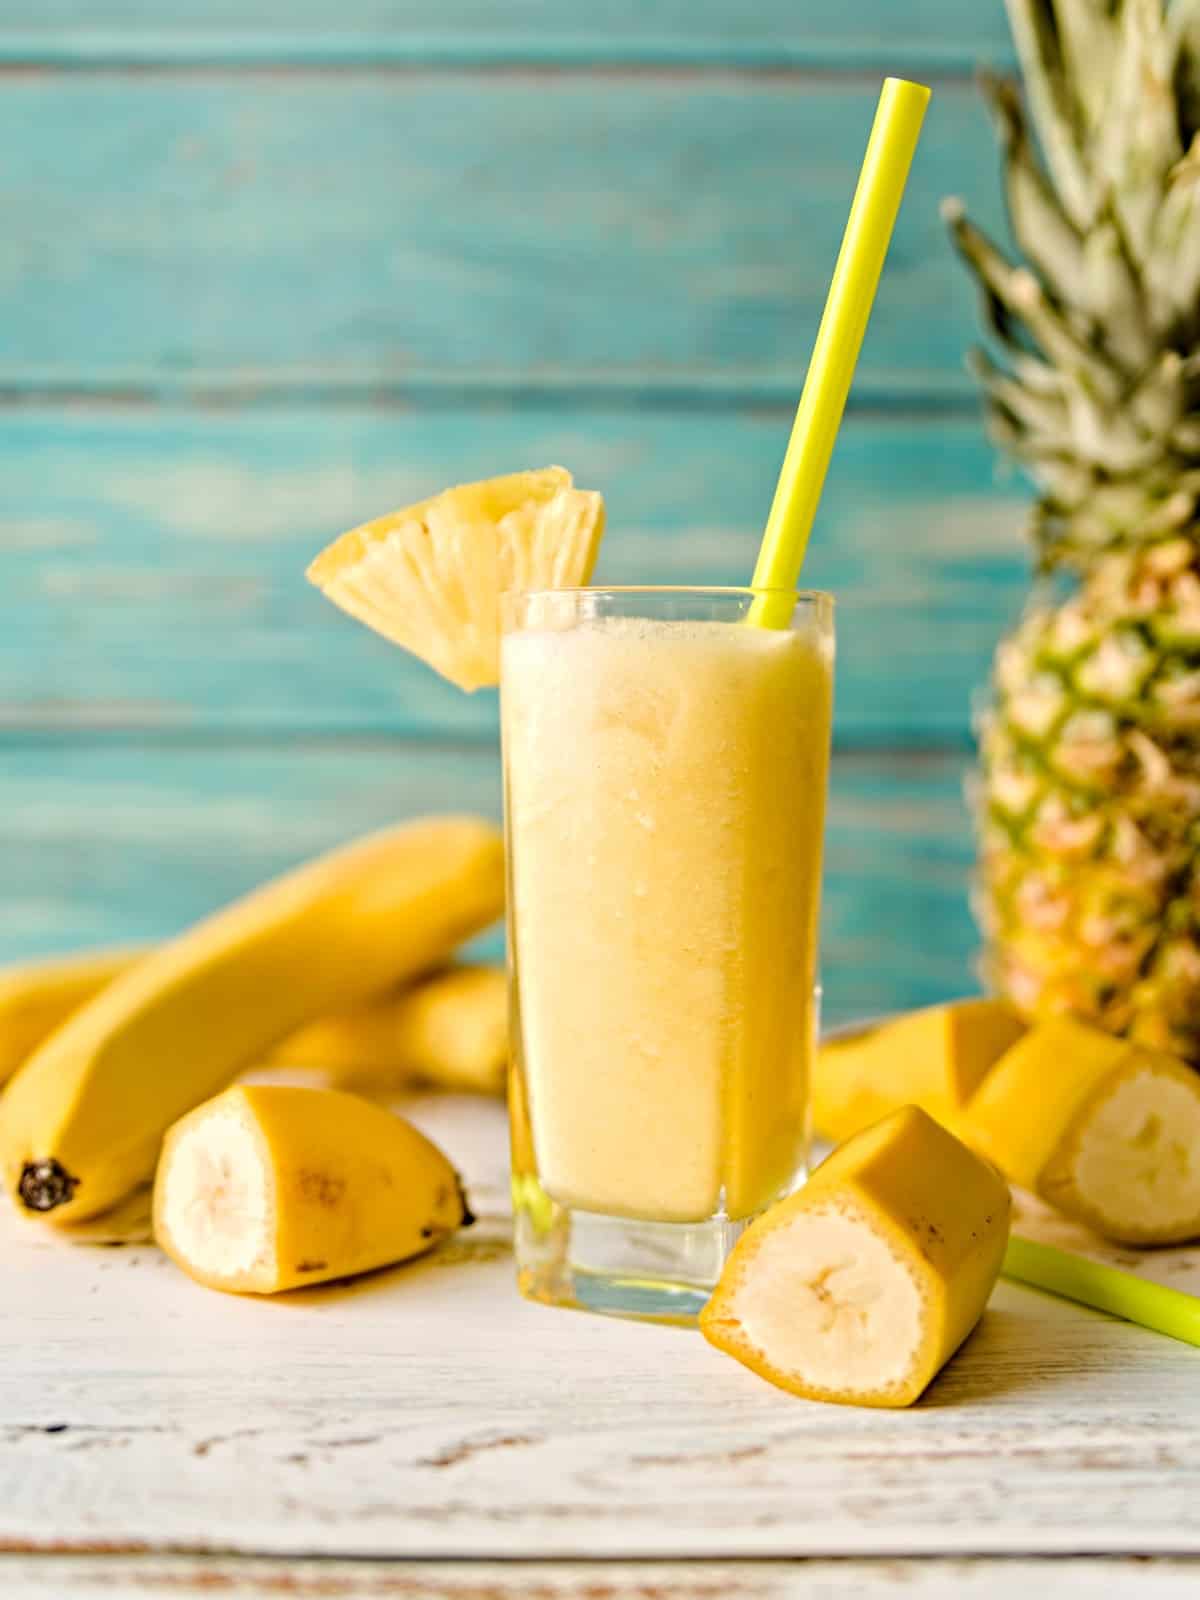 banana pineapple smoothie in a glass with sliced bananas and pineapple